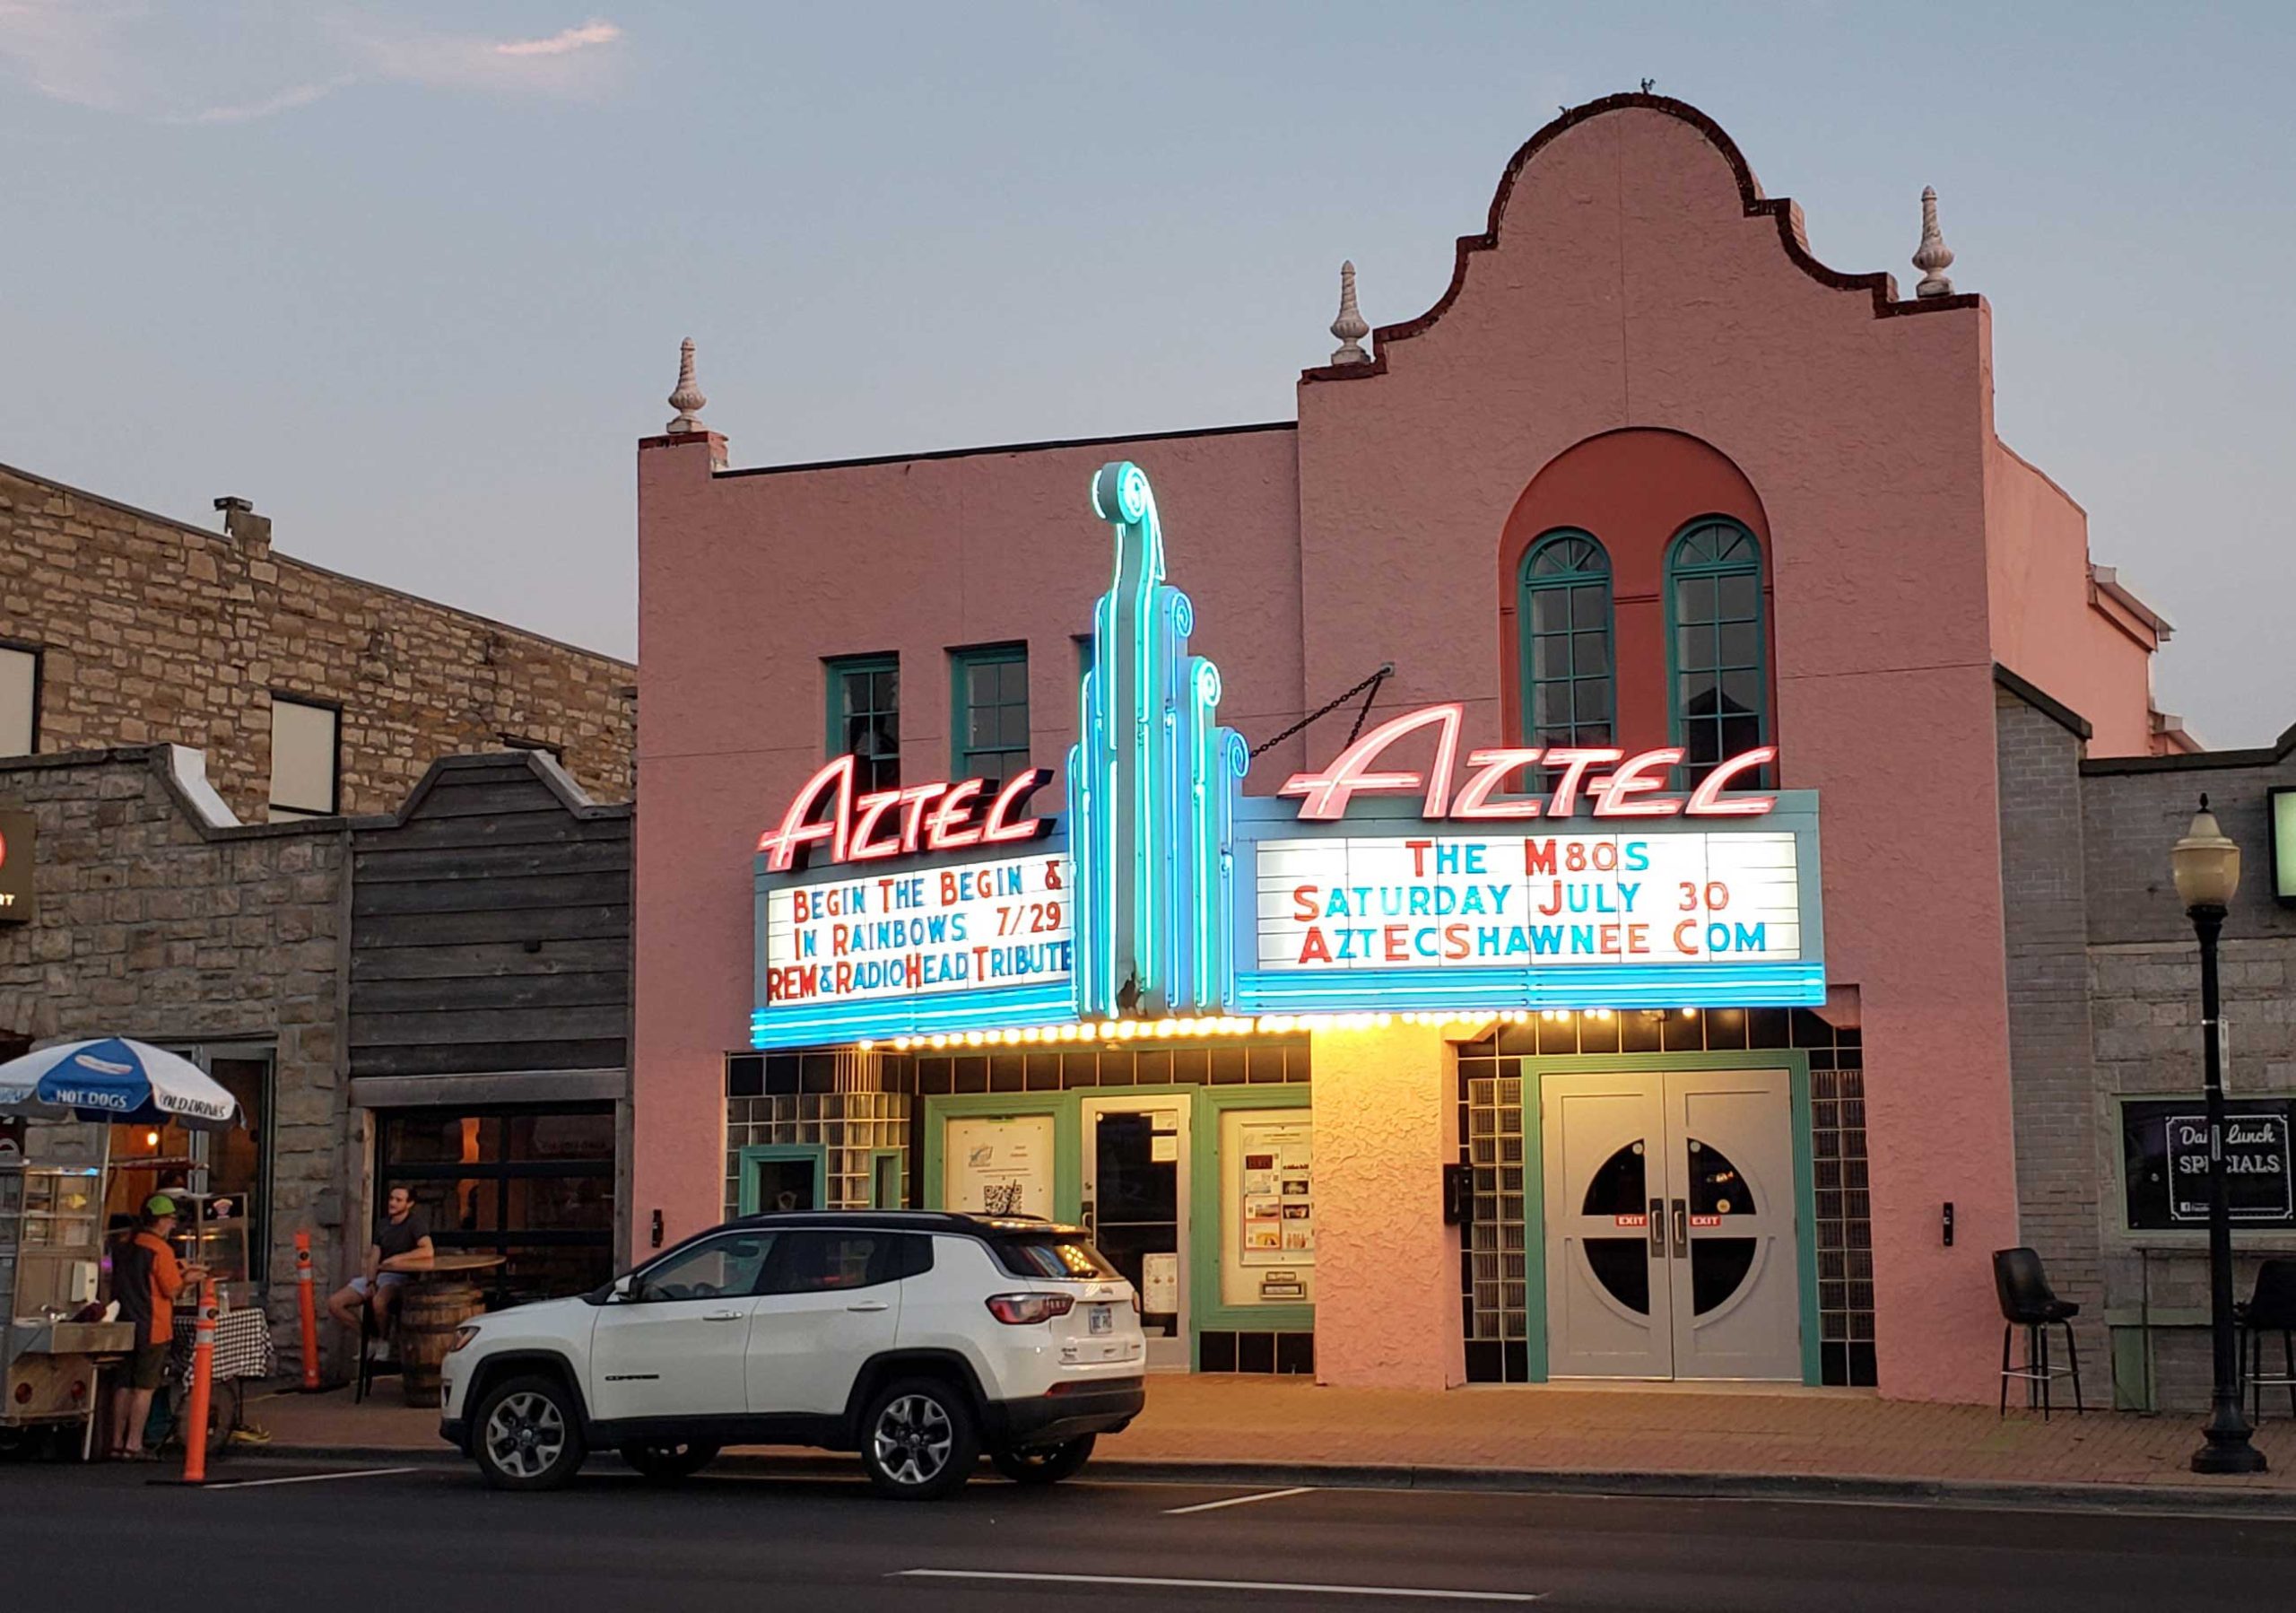 Let’s go to the movies Vintage movie venues have entertained audiences for decades